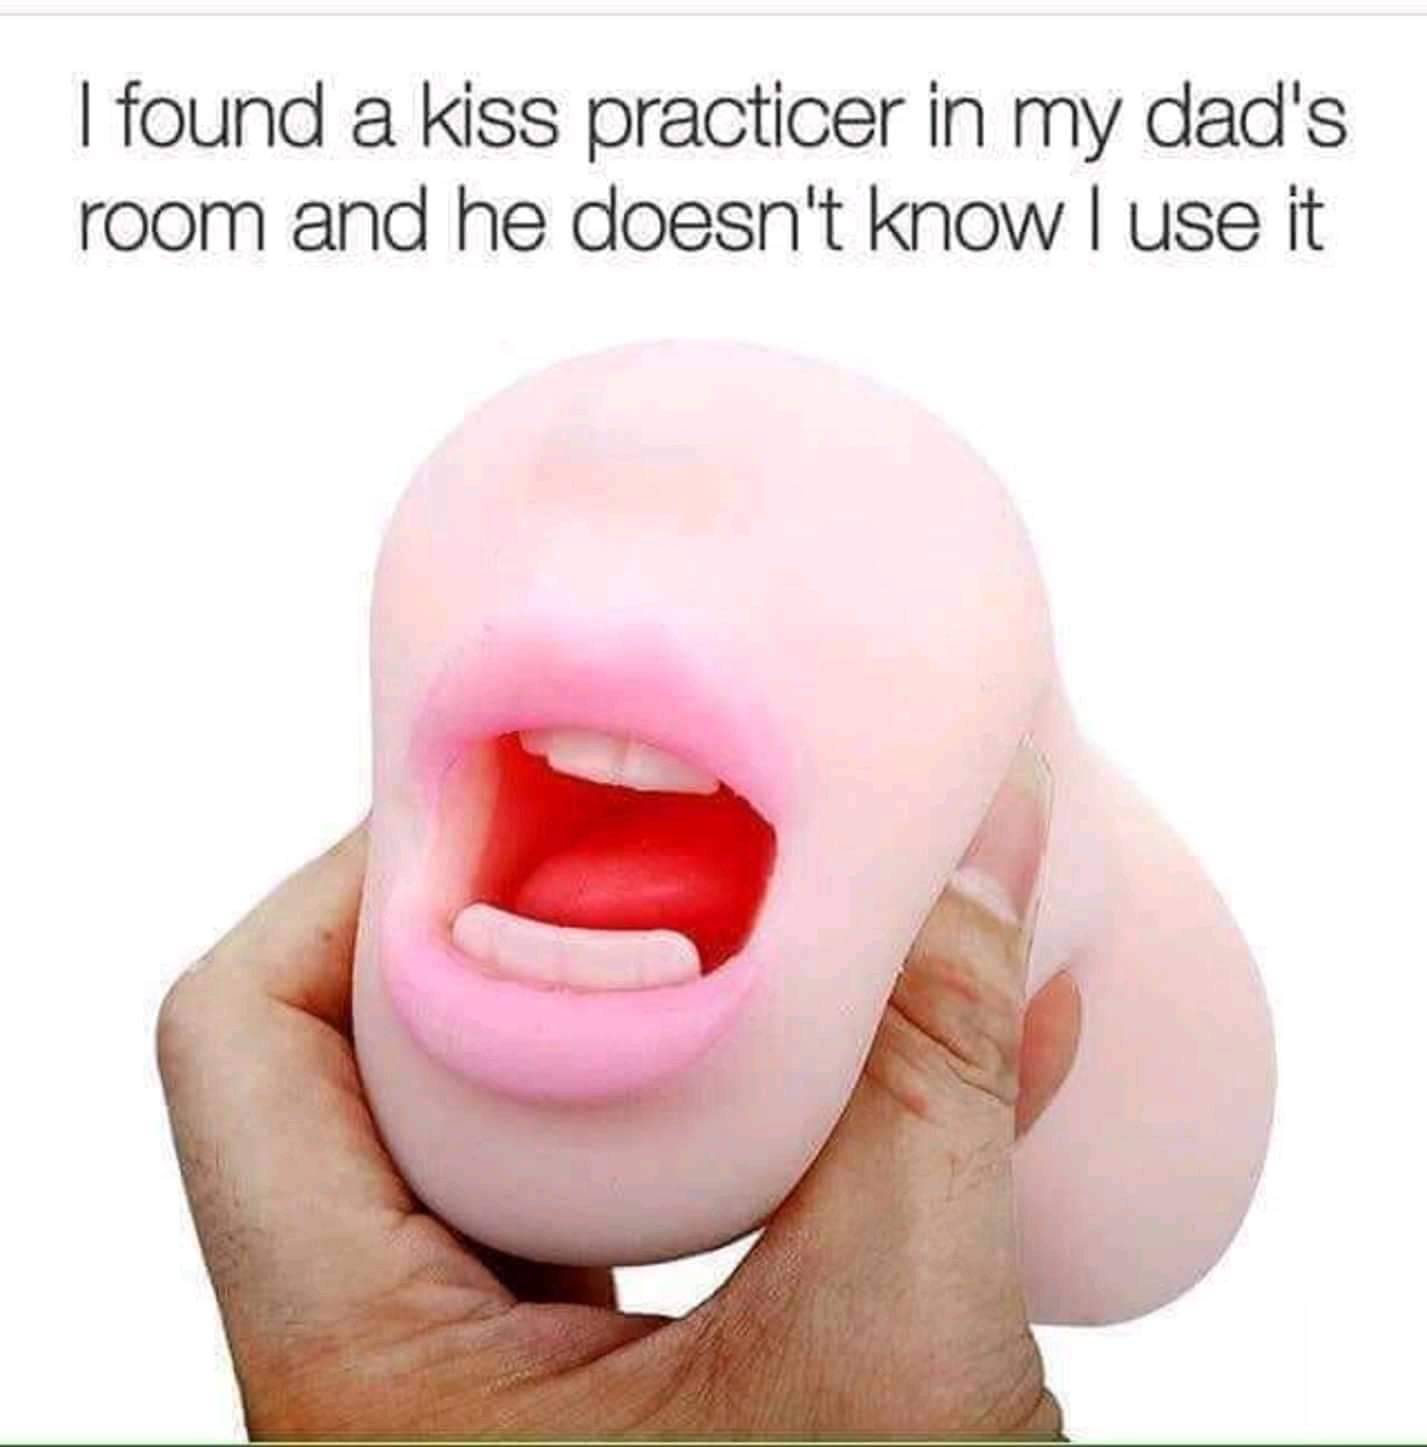 meme - kiss practicer - I found a kiss practicer in my dad's room and he doesn't know I use it